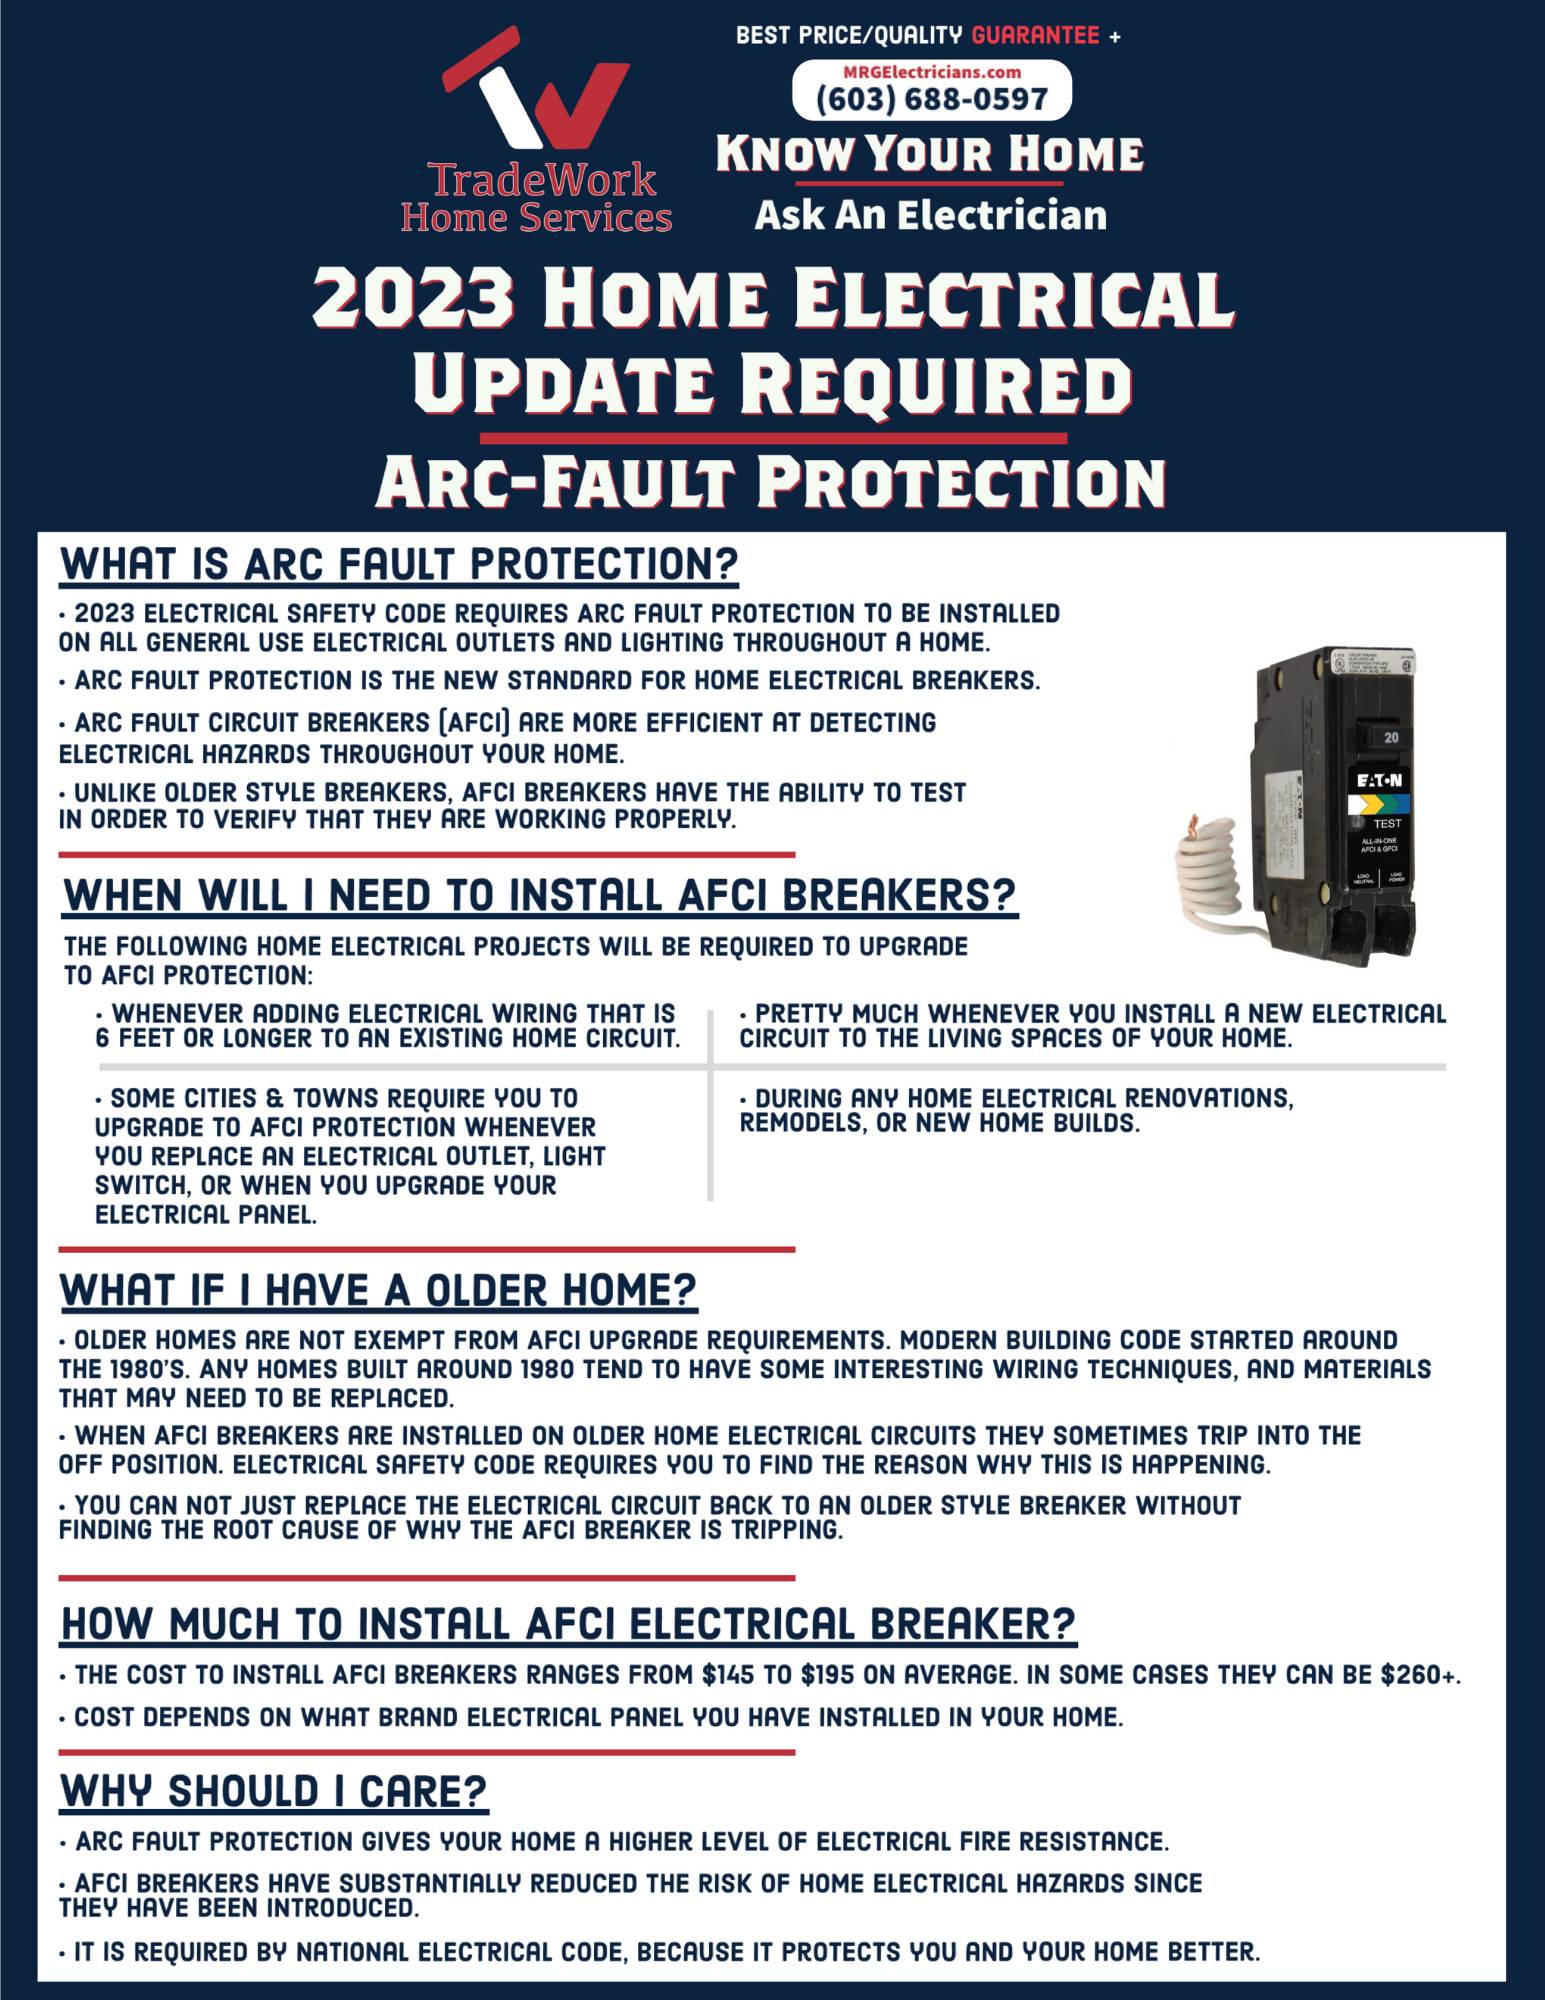 What Is (AFCI) Arc Fault Protection For My Home?